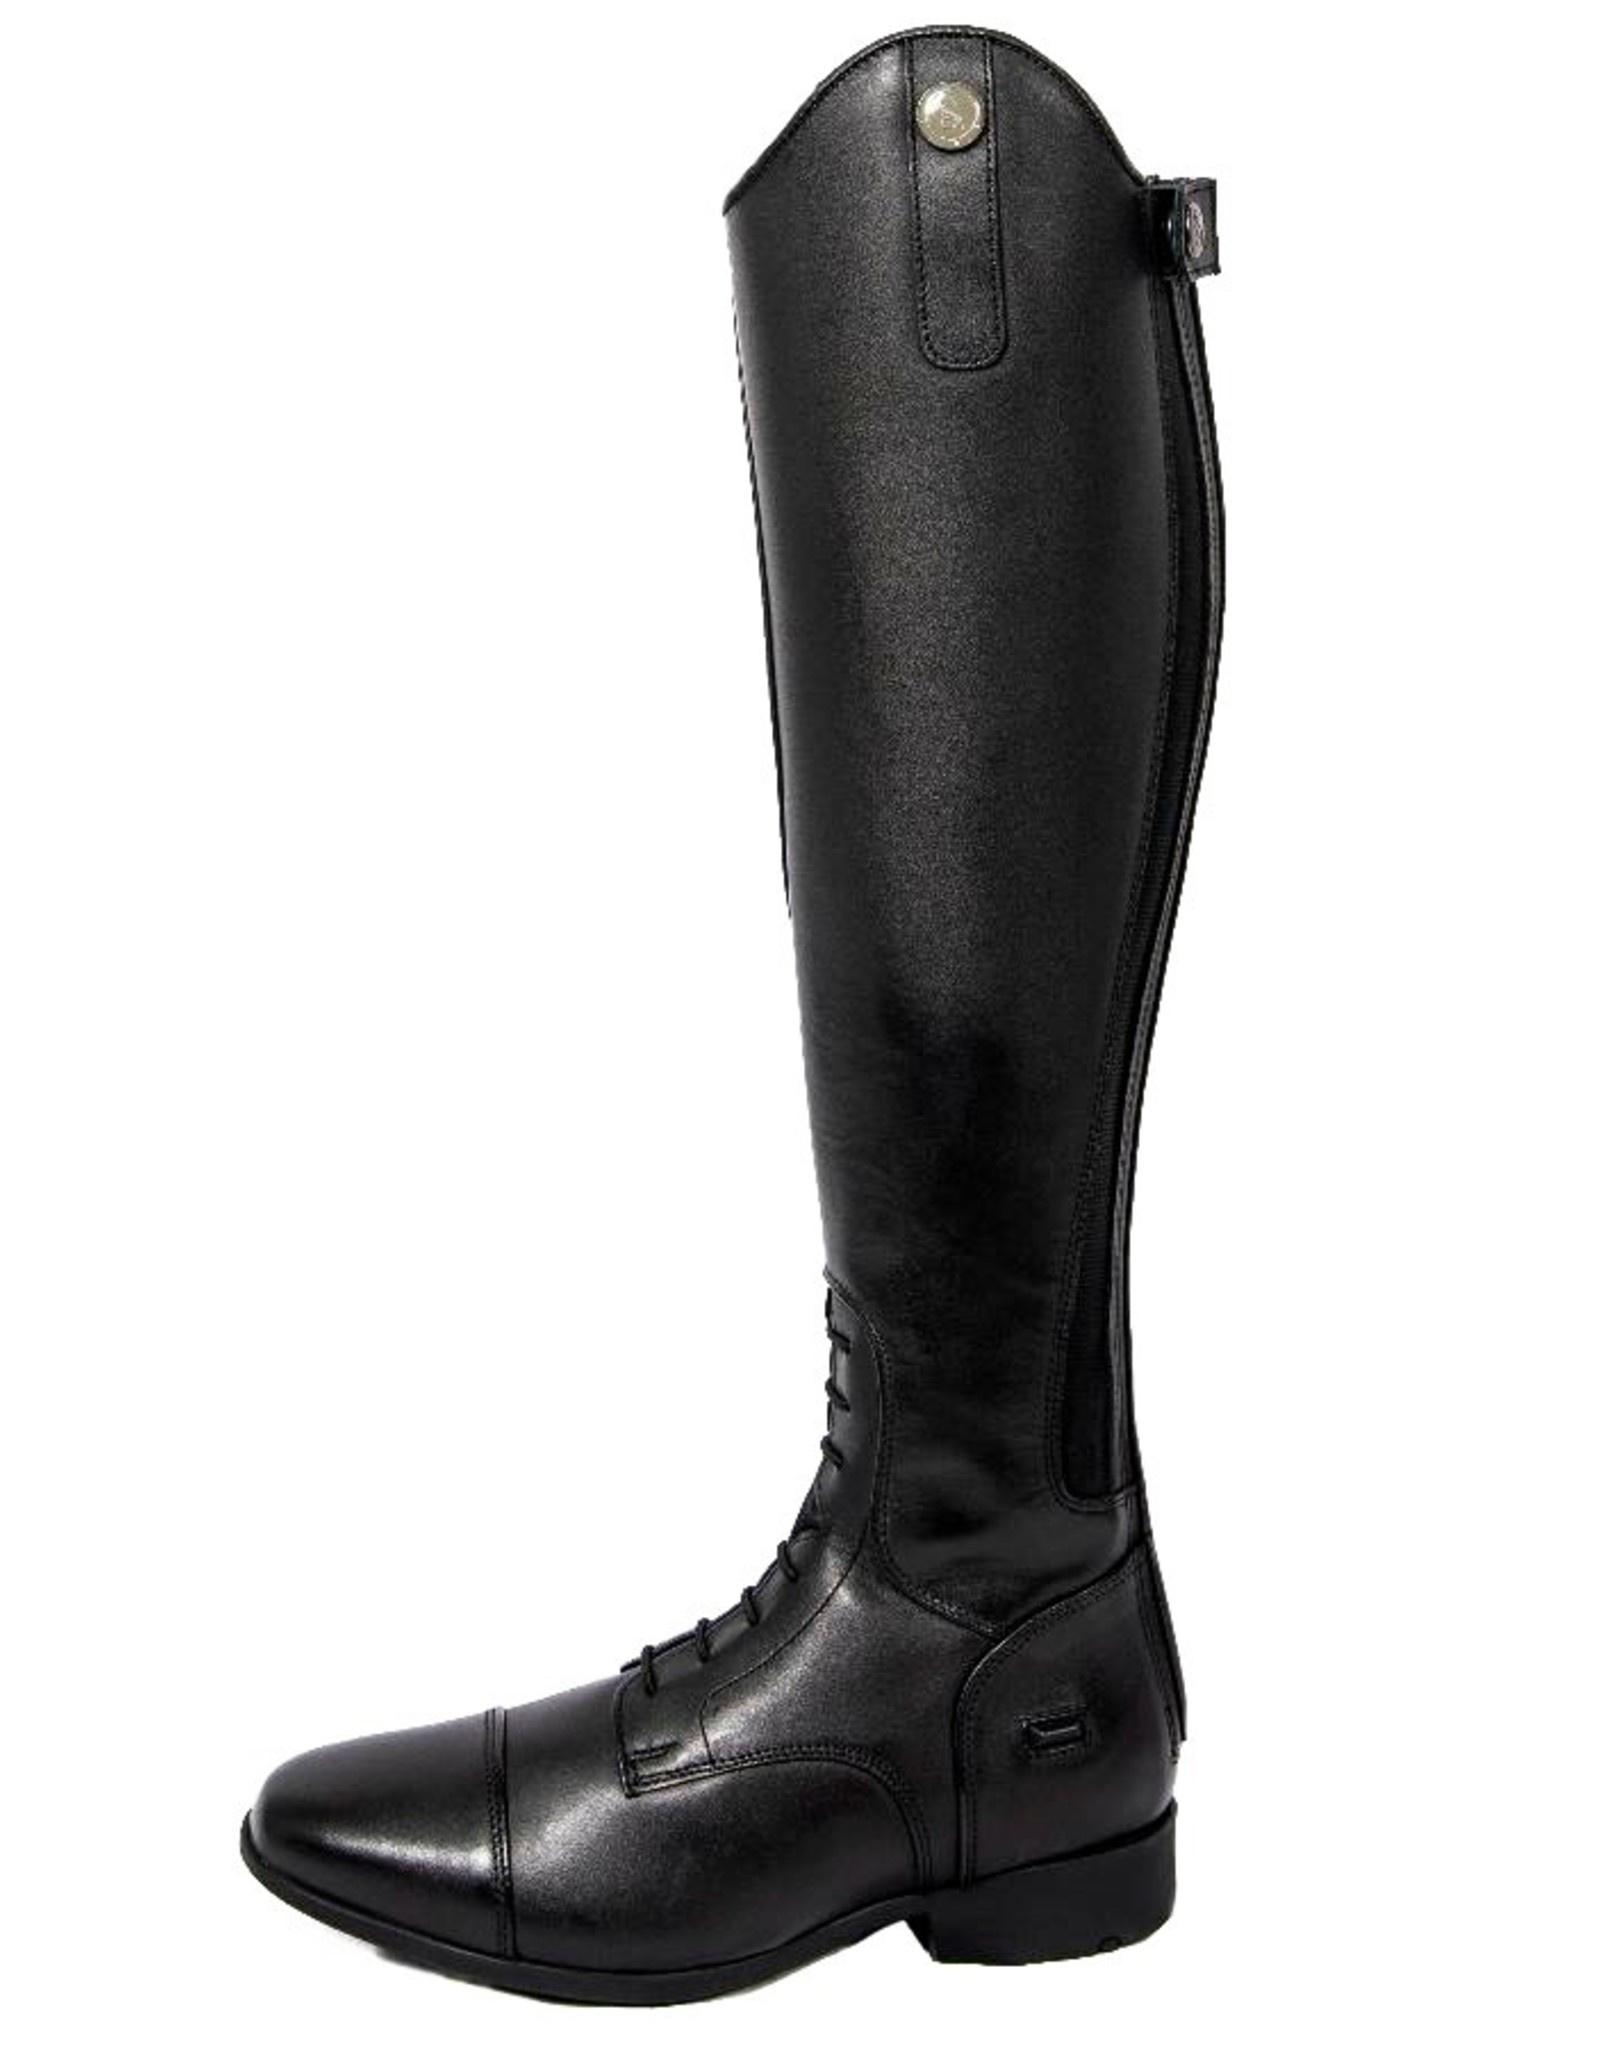 Stride Stride Leather Field Boots - Adults